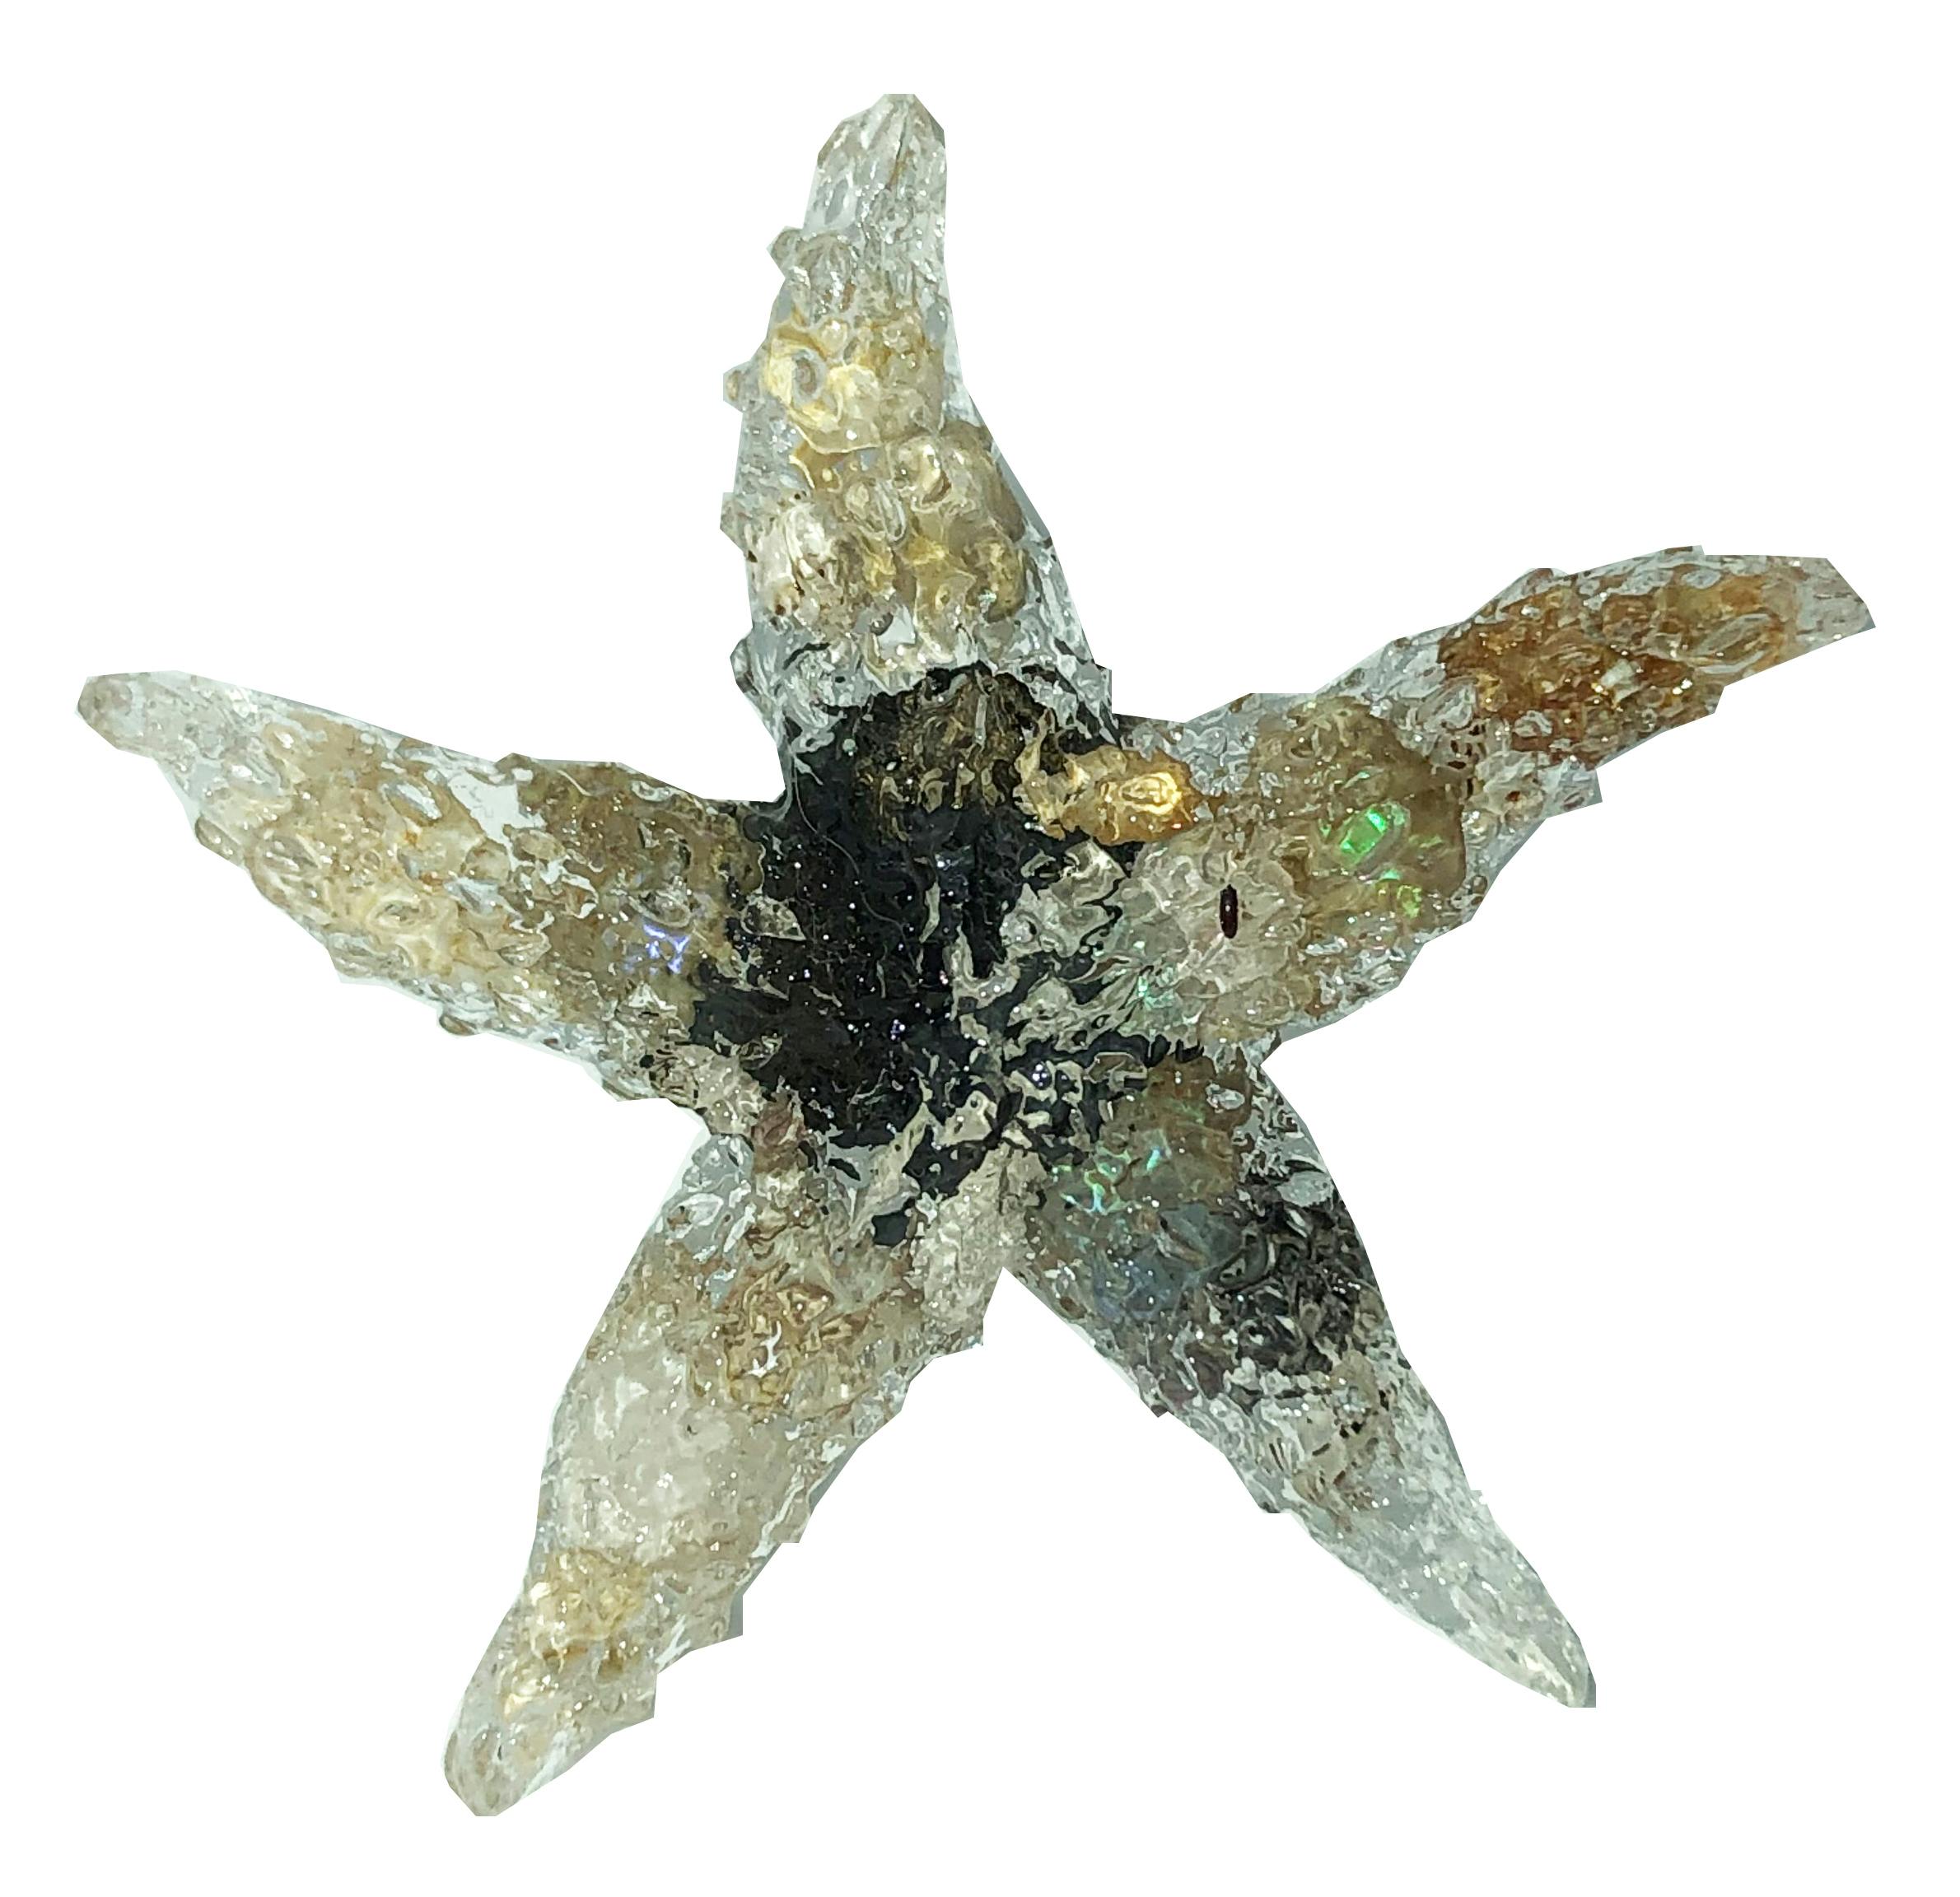 Resin Starfish magnet featuring local miniature shells.